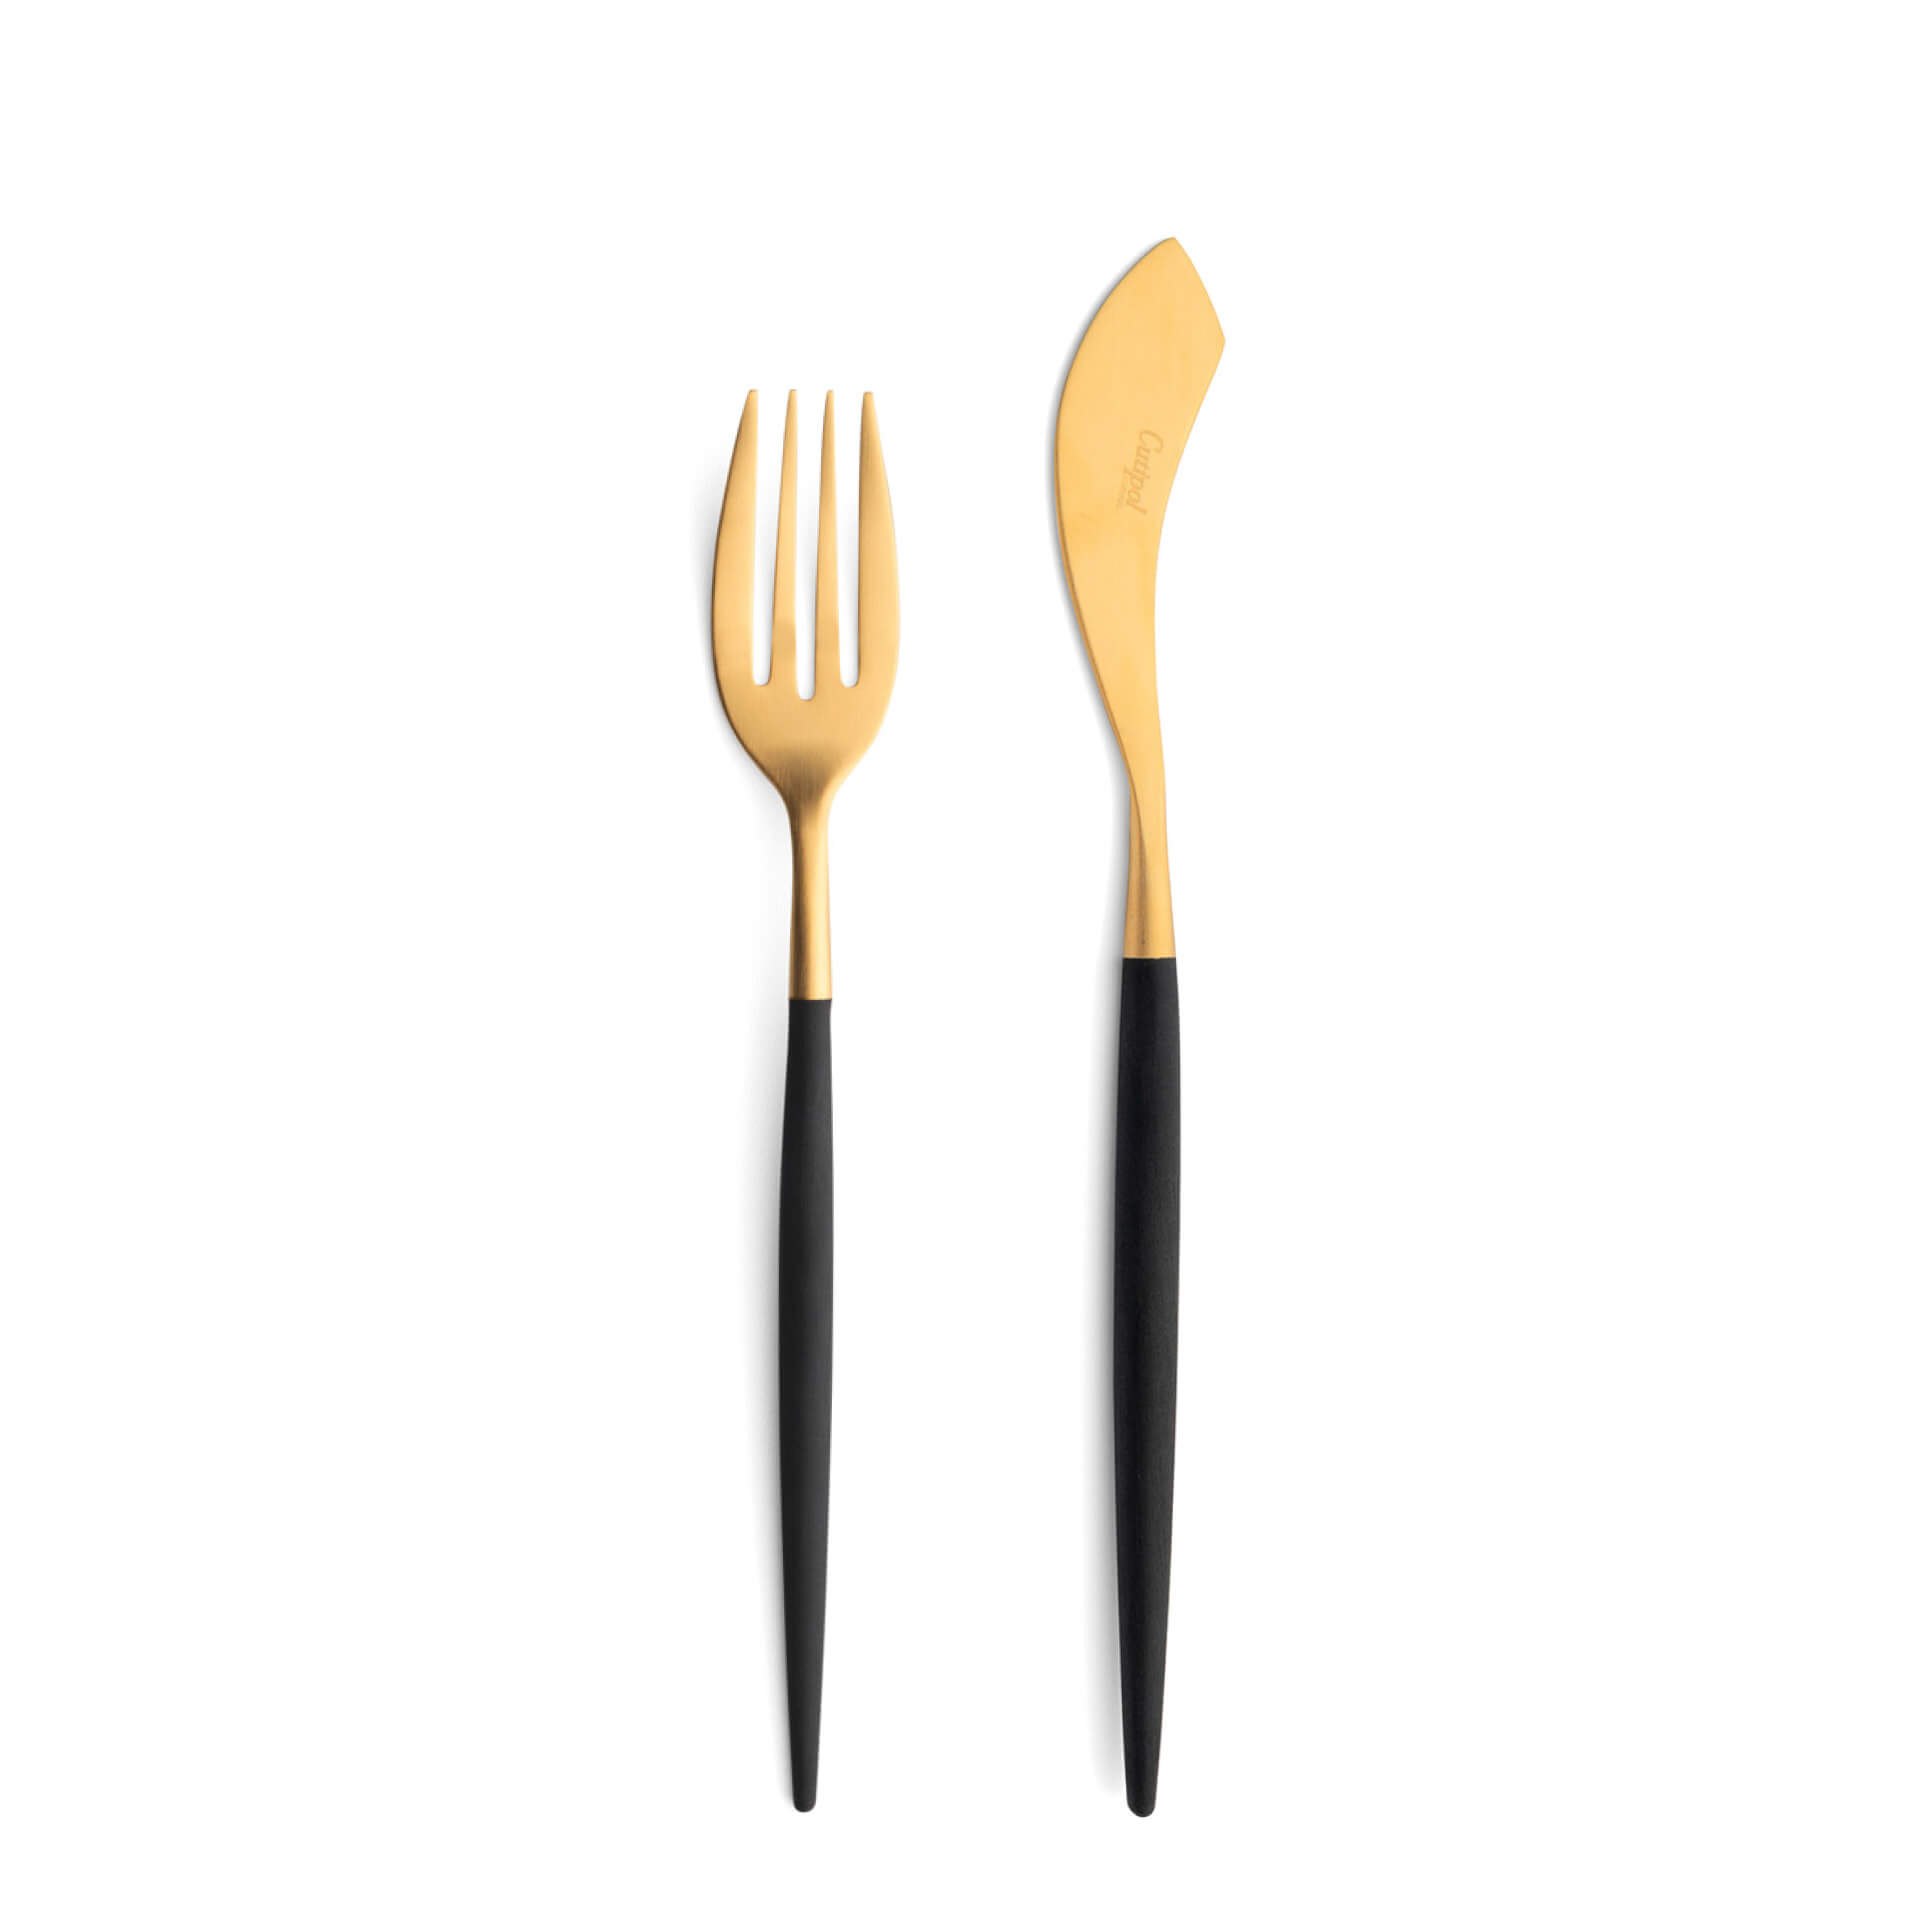 Cutipol Cutlery Mio Gold with fish fork and fish knife